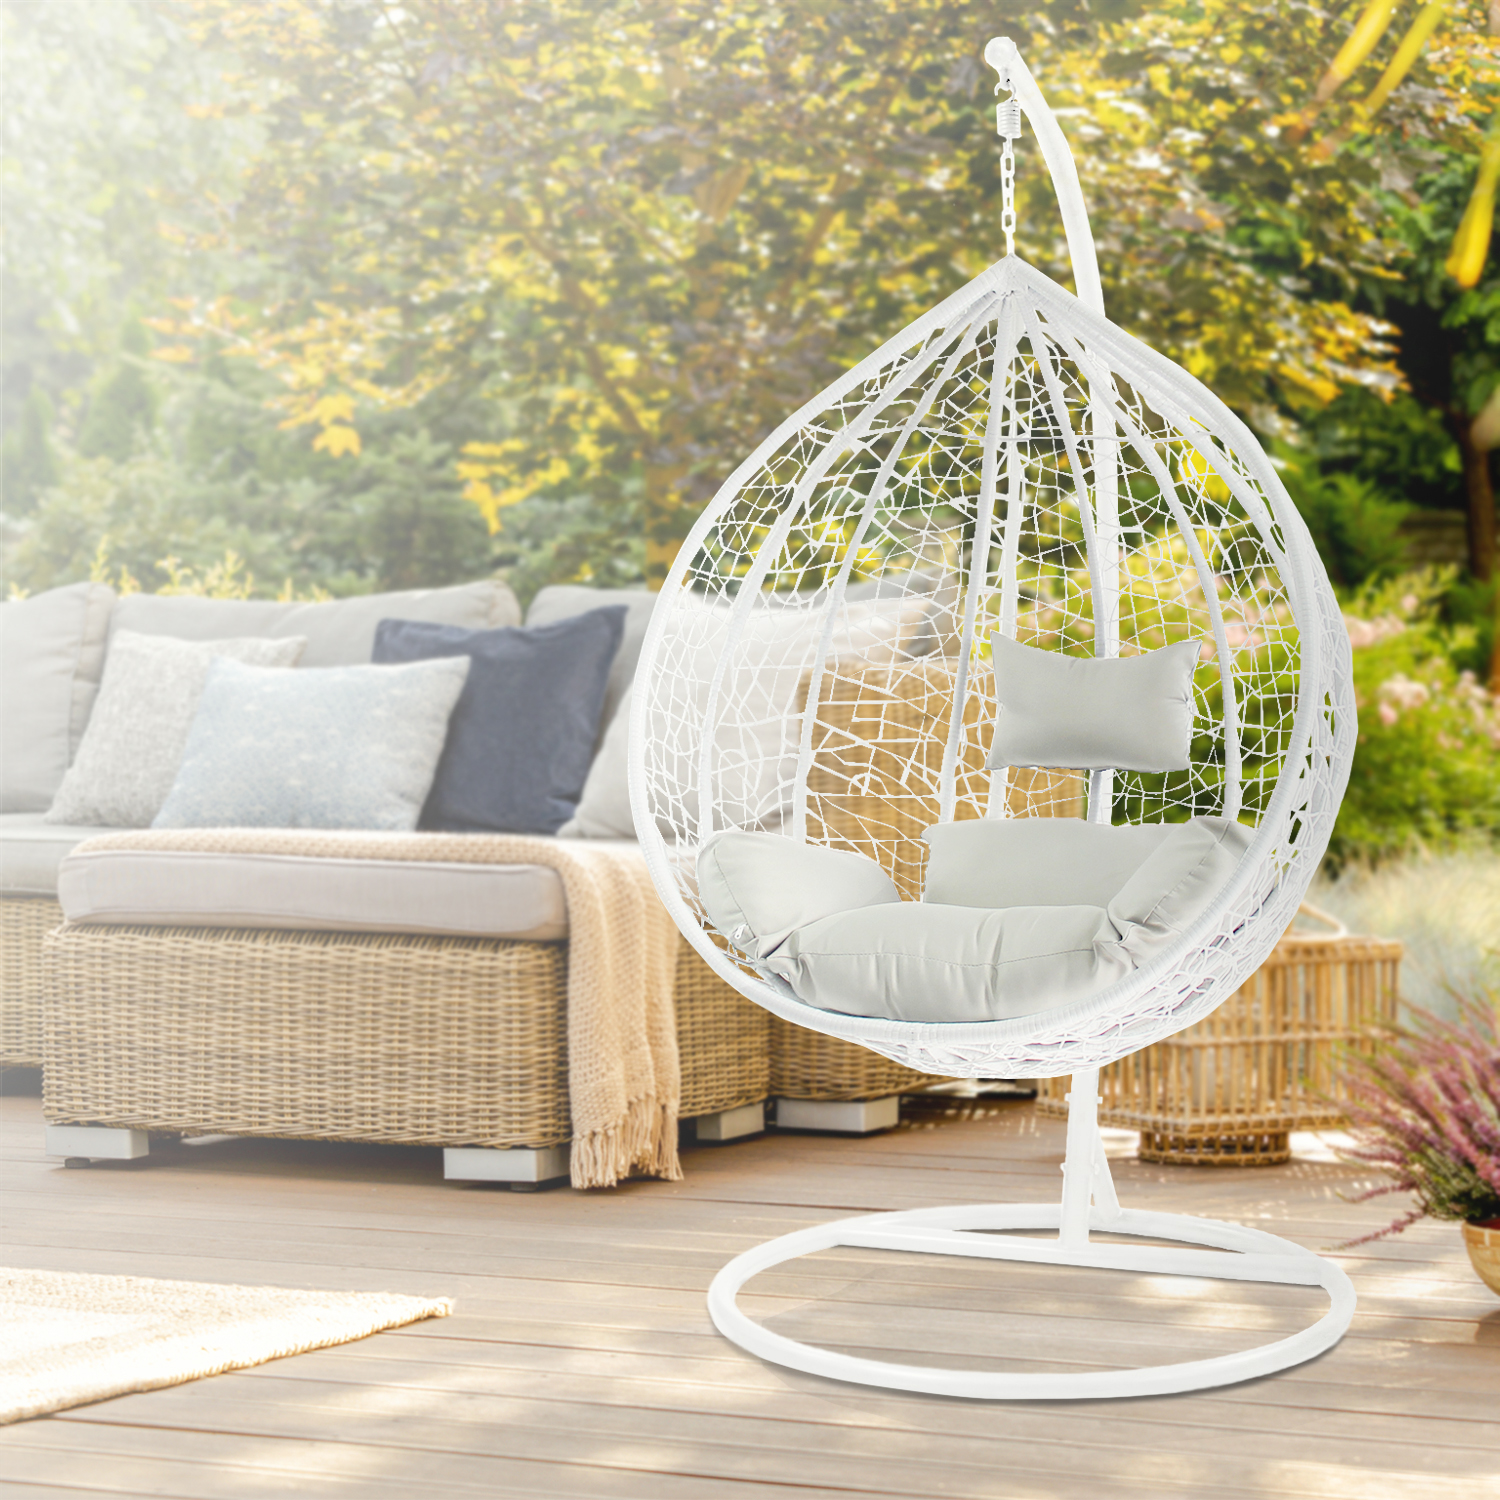 Patio Swing Chair Outdoor Wicker Tear Drop with Gray Cushion Snow White Living Room - image 3 of 8